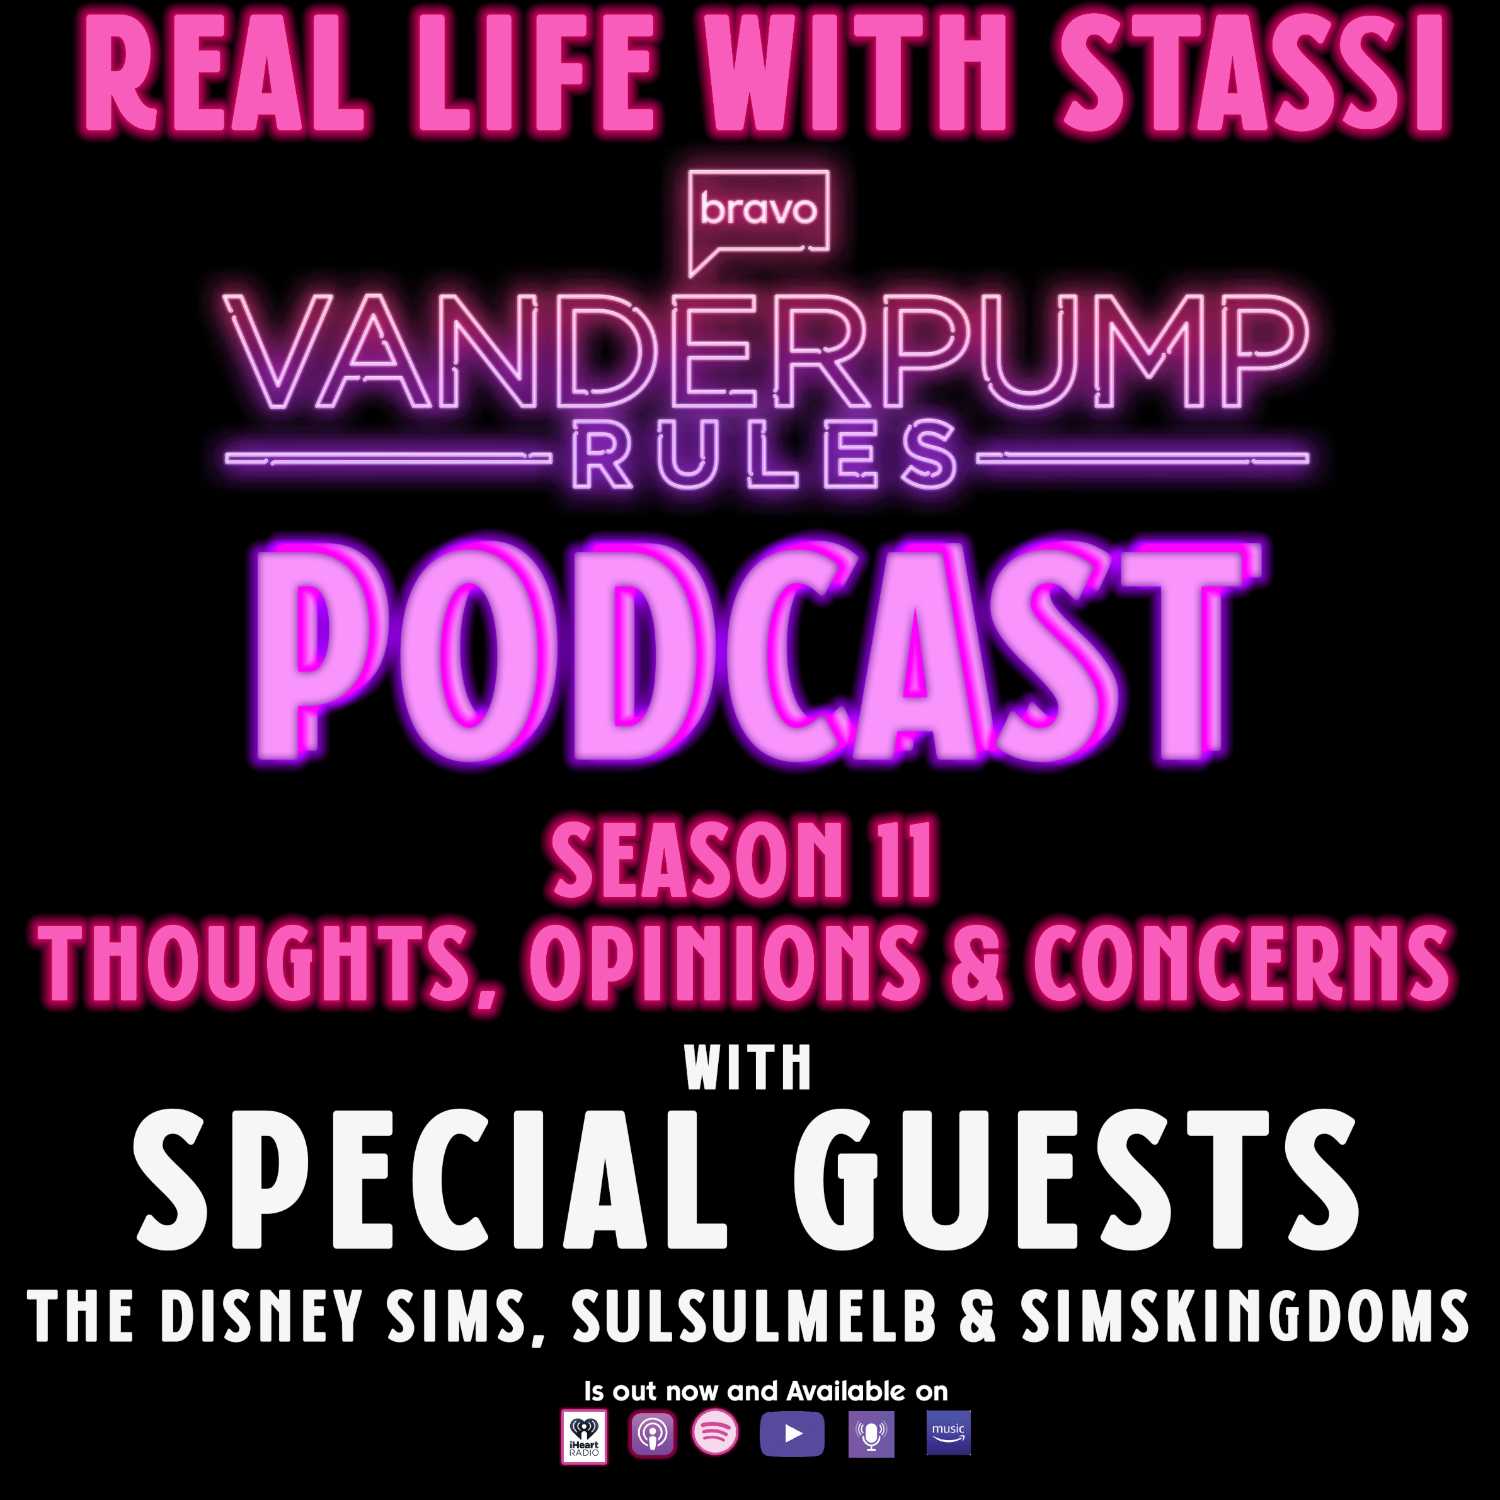 Real Life With Stassi: Vanderpump Rules with Special Guests The Disney Sims, sulsulmelb & Simskingdoms